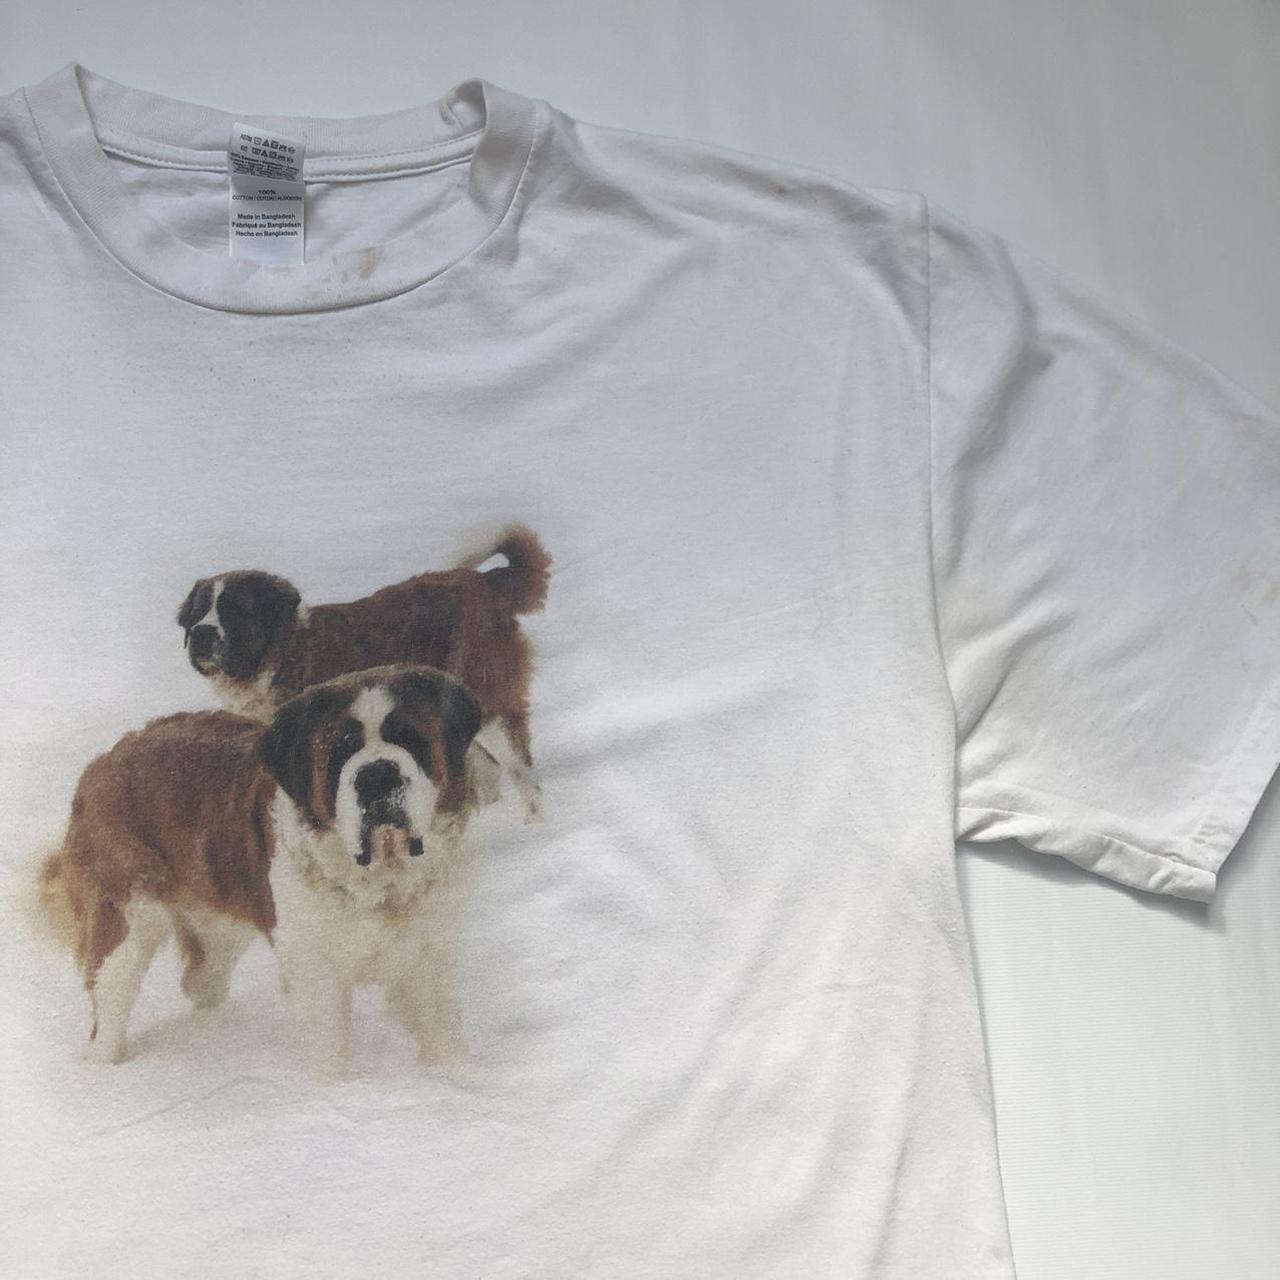 Product Image 2 - Vintage Dog Graphic T-shirt. This